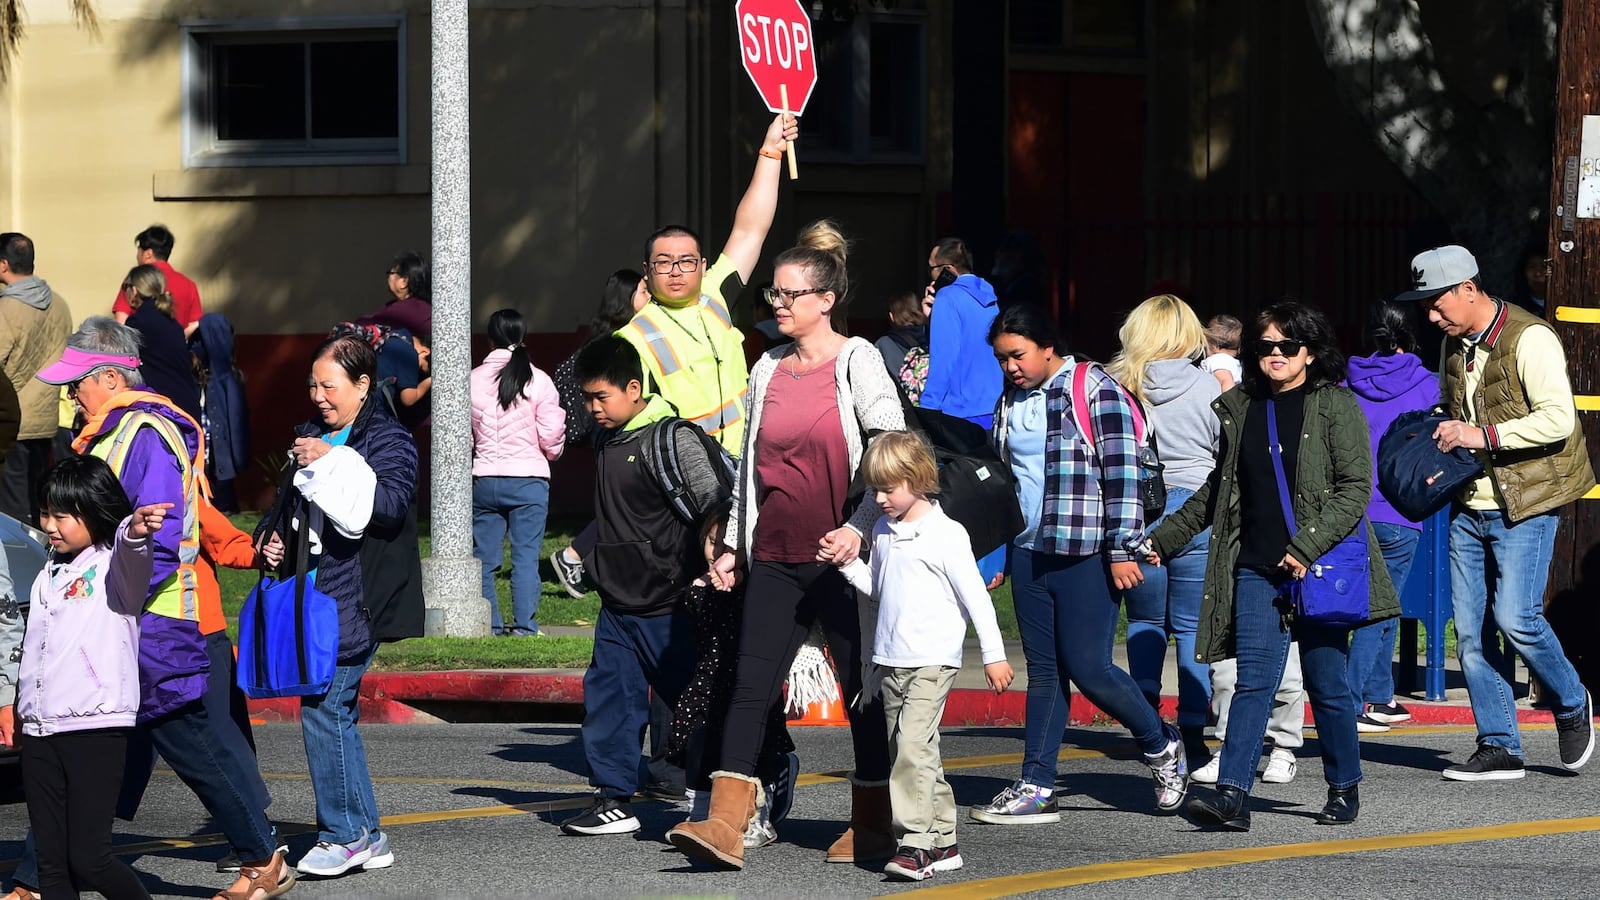 An Alhambra Unified School District crossing guard stops traffic for parents picking up their children from Ramona Elementary School on Feb. 4, 2020, in Alhambra, California. As the novel coronavirus outbreak spreads, fueling rumors and misinformation, an online petition to cancel classes in the  district had garnered more than 14,000 signatures. The petition on Change.org urges Alhambra Unified, east of Los Angeles and with a heavily Asian population, to shut down until the outbreak is over. Sc